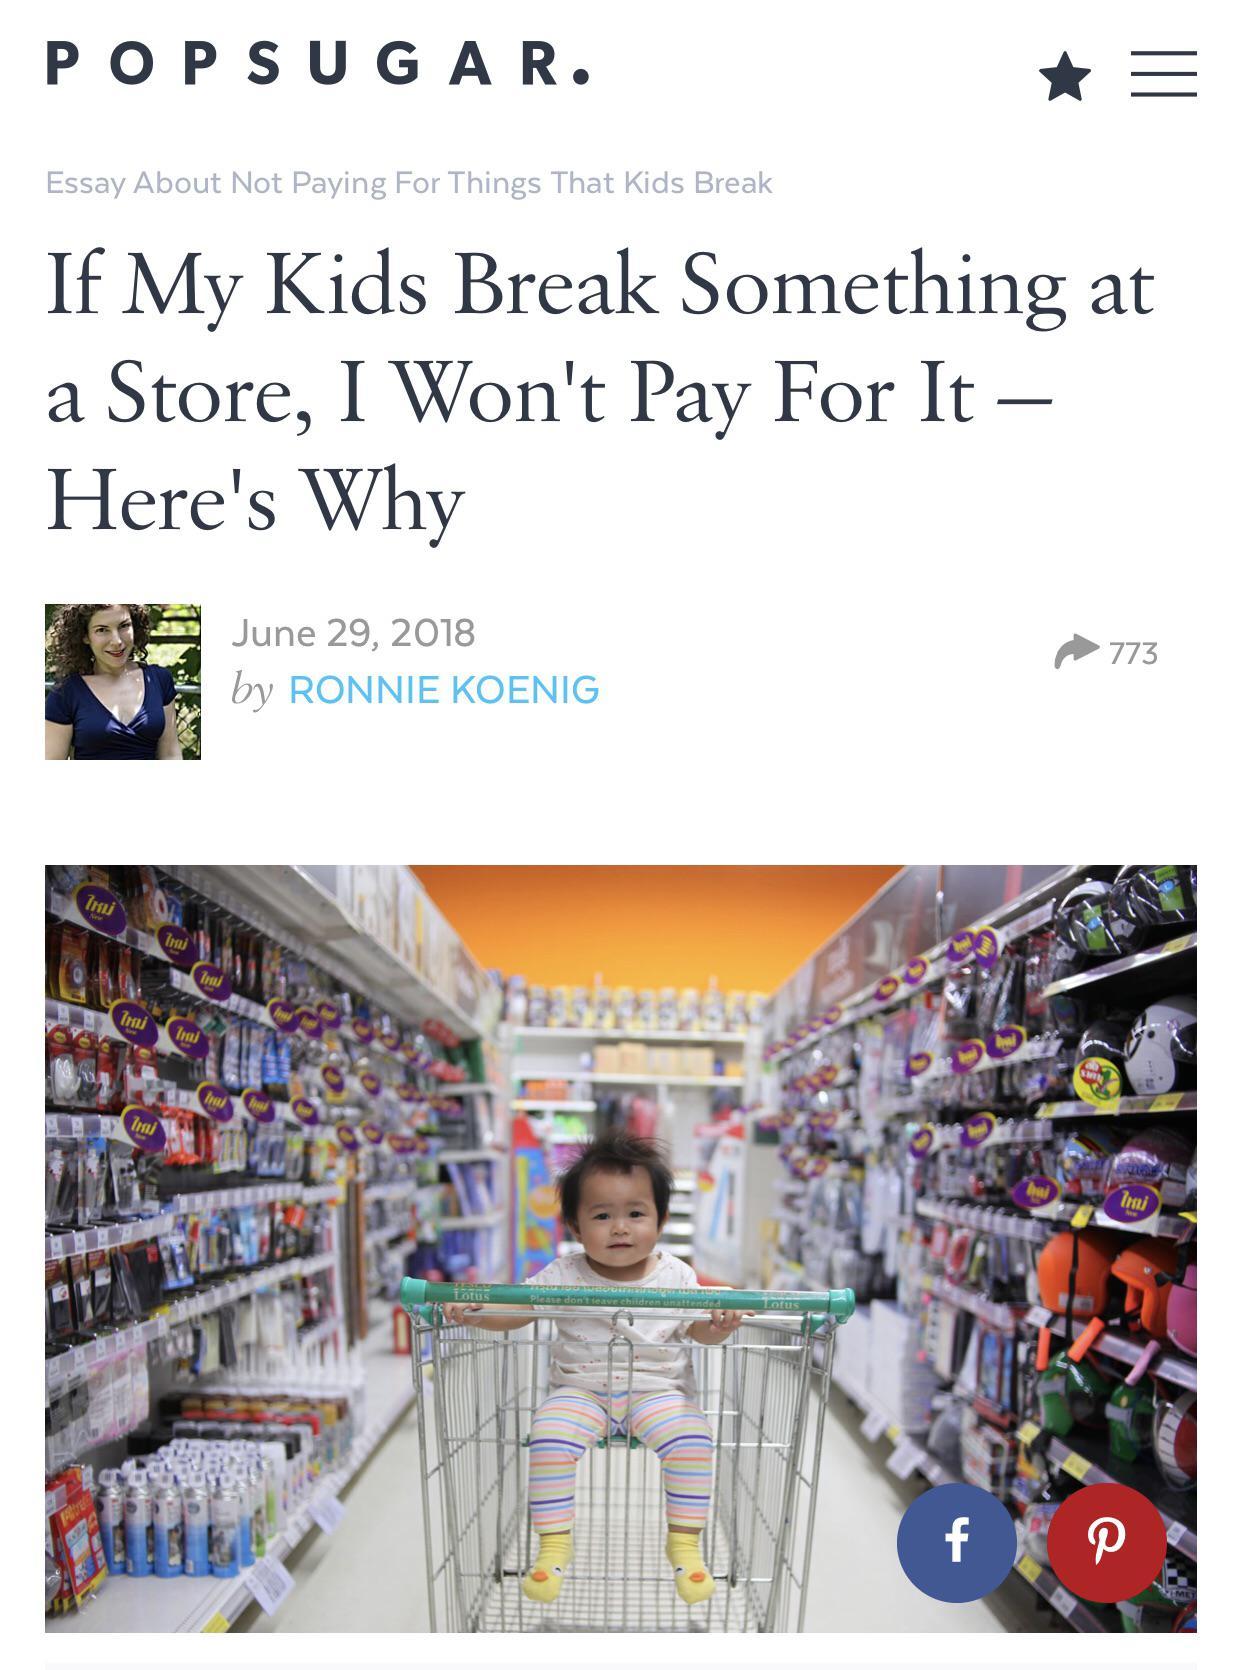 Infant - Popsugar. Essay About Not Paying For Things That Kids Break If My Kids Break Something at a Store, I Won't Pay For It Here's Why by Ronnie Koenig 773 Th Tr load Tru Imi Pohre Please donte se children intended